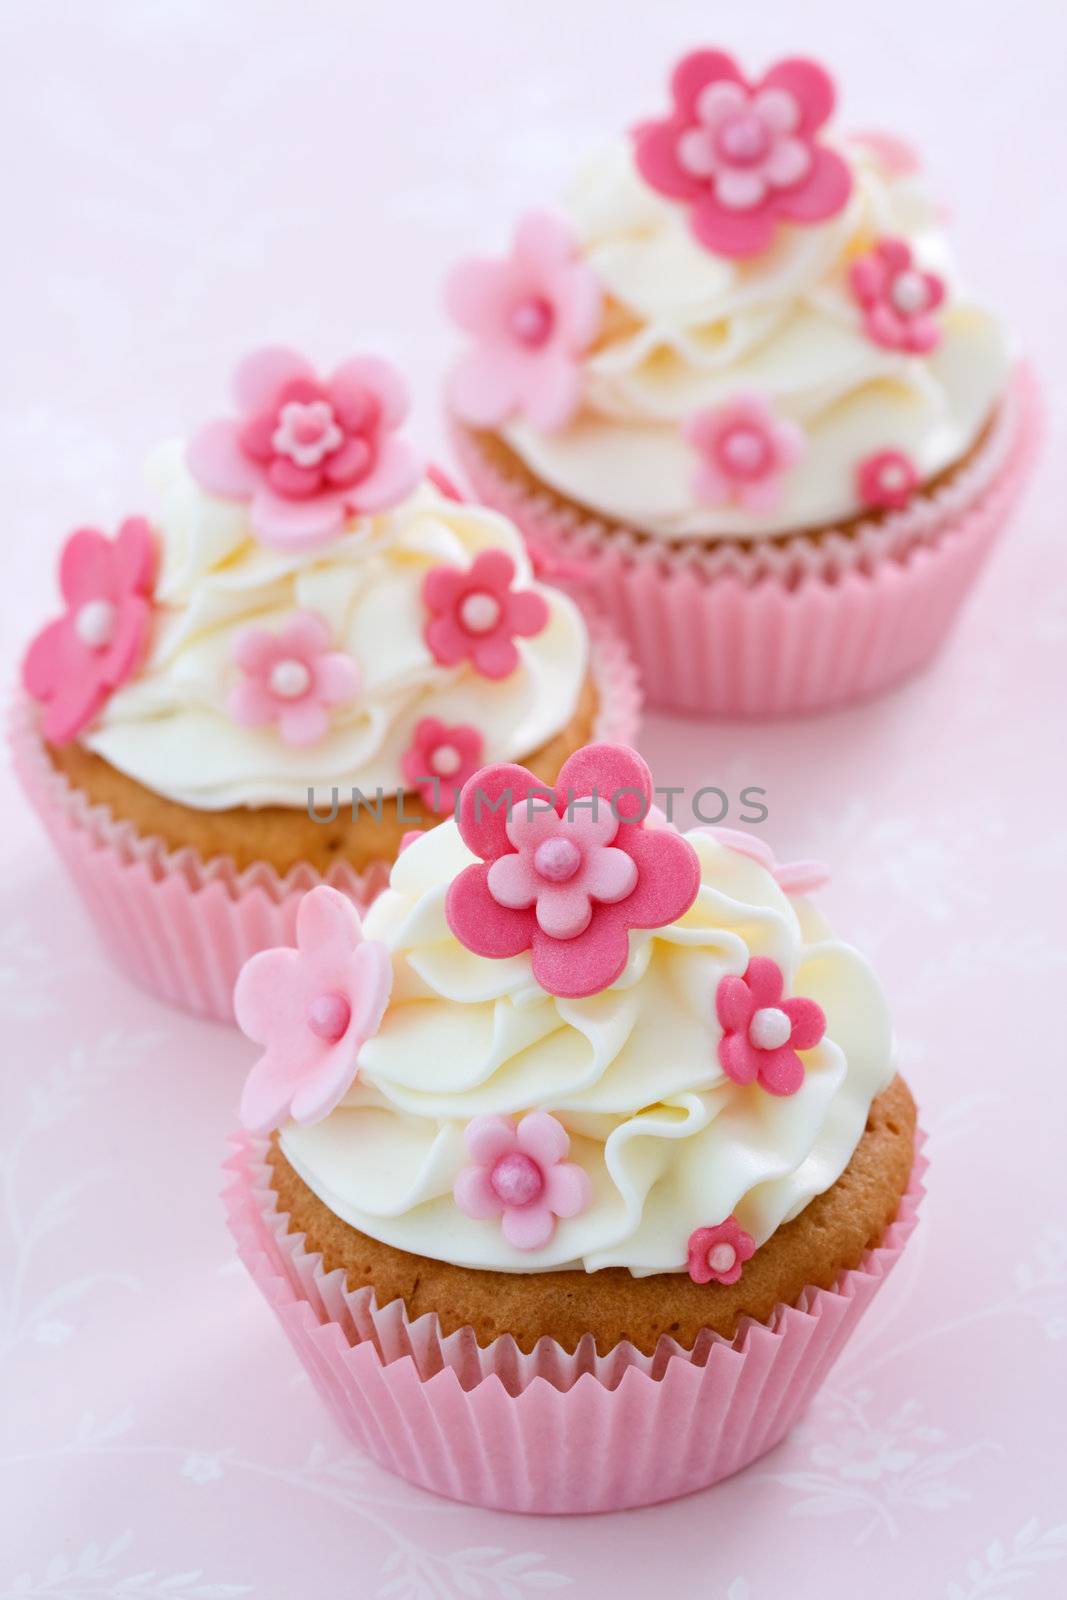 Flower cupcakes by RuthBlack